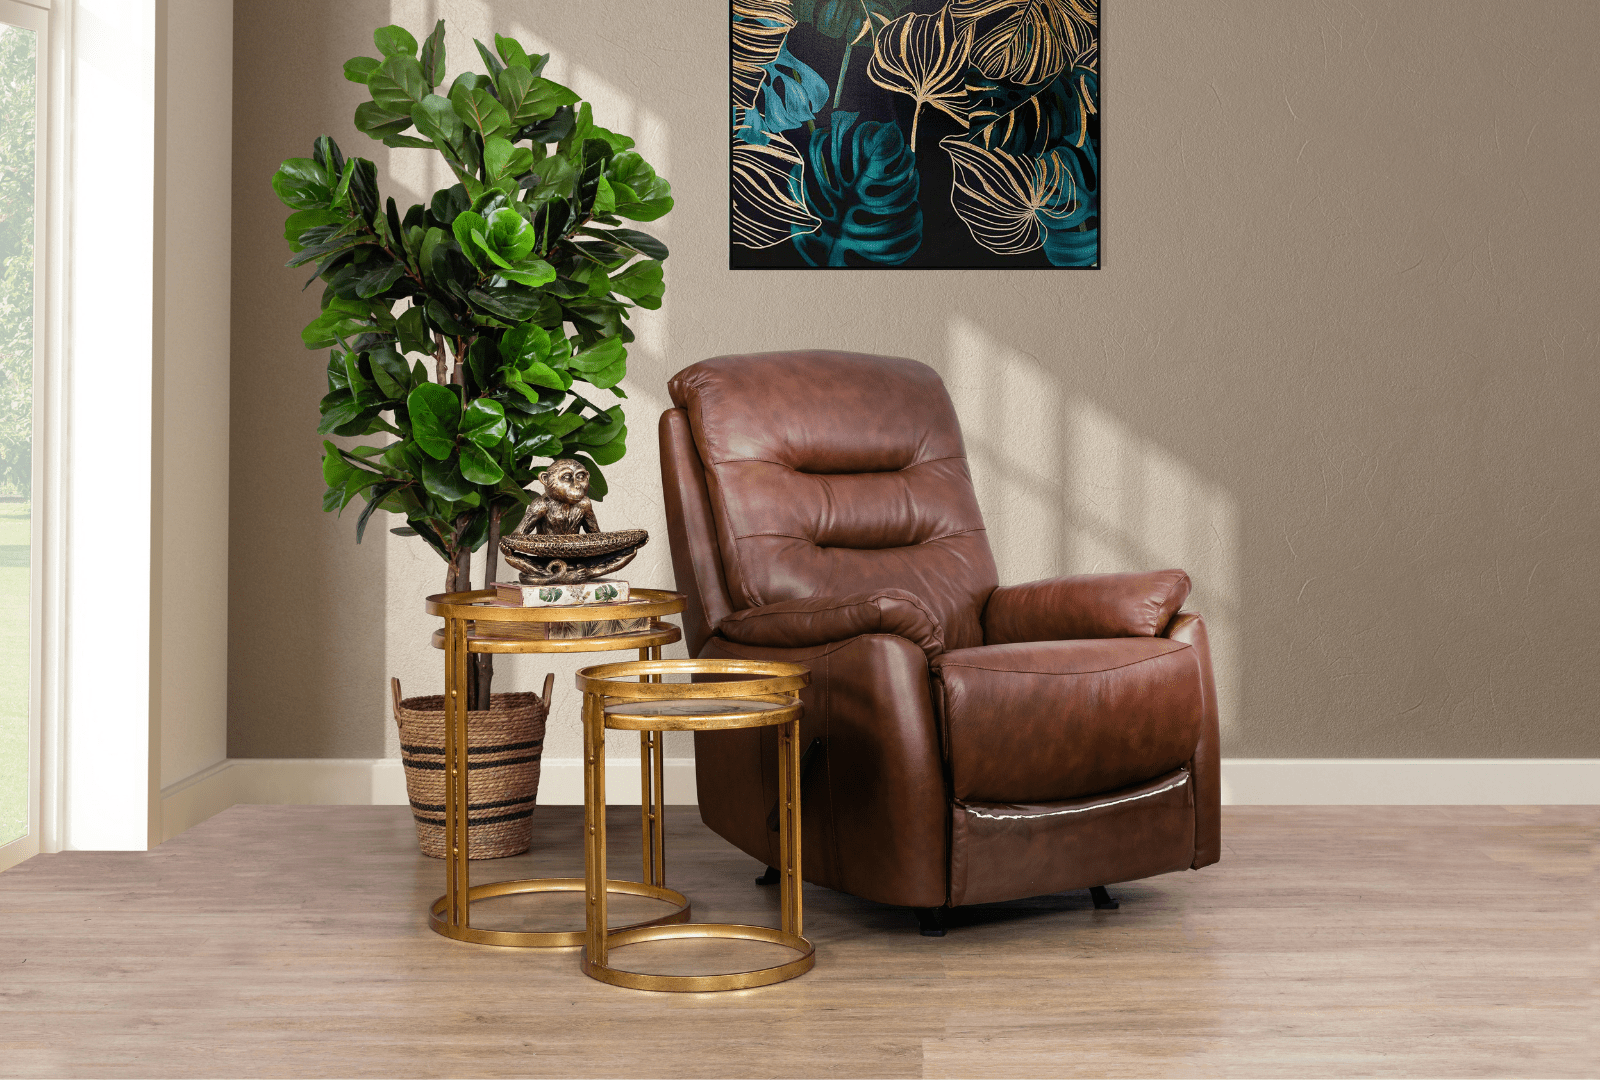 Relax and Recline in Style: The Benefits of a Rocker Recliner - Why the Dallas Rocker Recliner is the Ultimate Comfort Solution